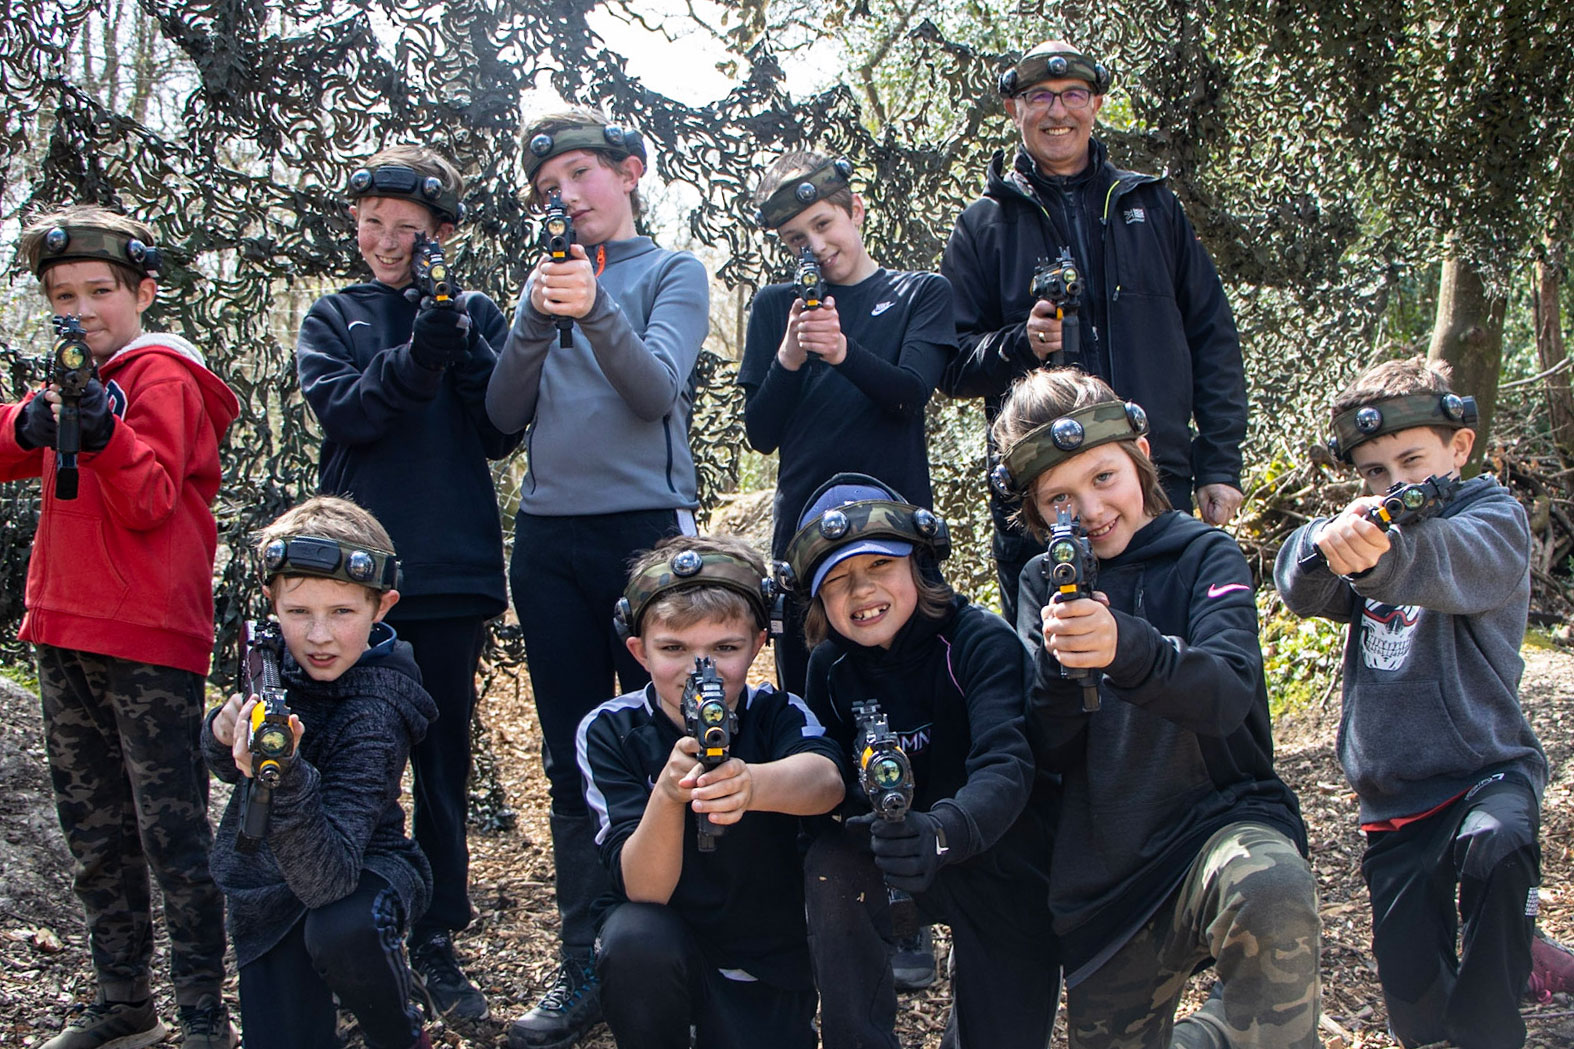 A group of boys enjoying a BattleZone laser tag party